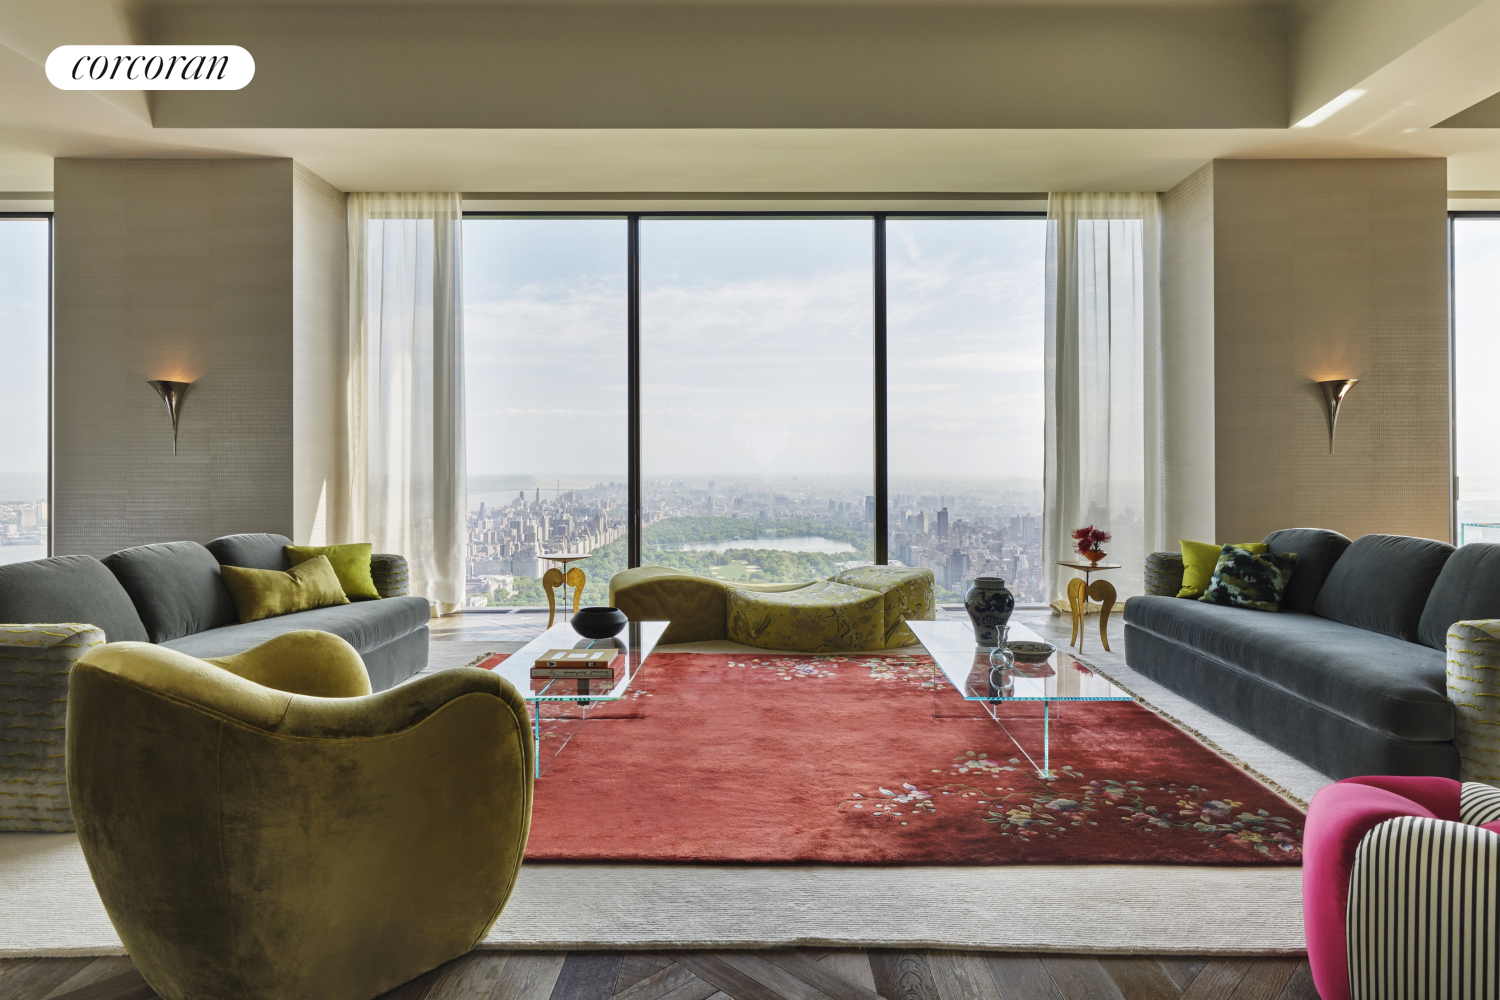 111 West 57th Street 65, Central Park South, Midtown West, NYC - 3 Bedrooms  
3.5 Bathrooms  
6 Rooms - 